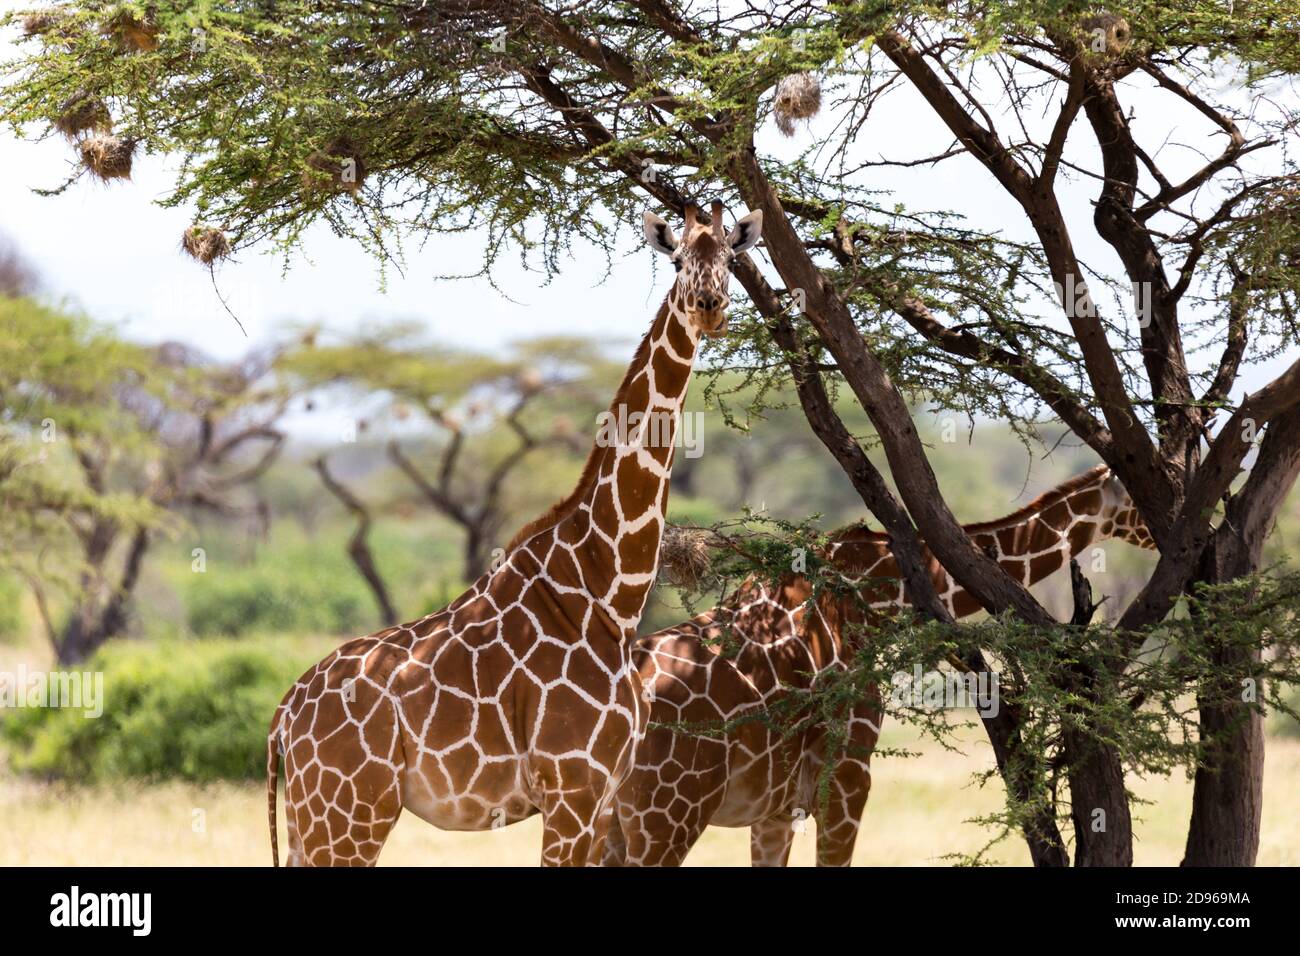 The giraffes eat leaves from the acacia trees. Stock Photo